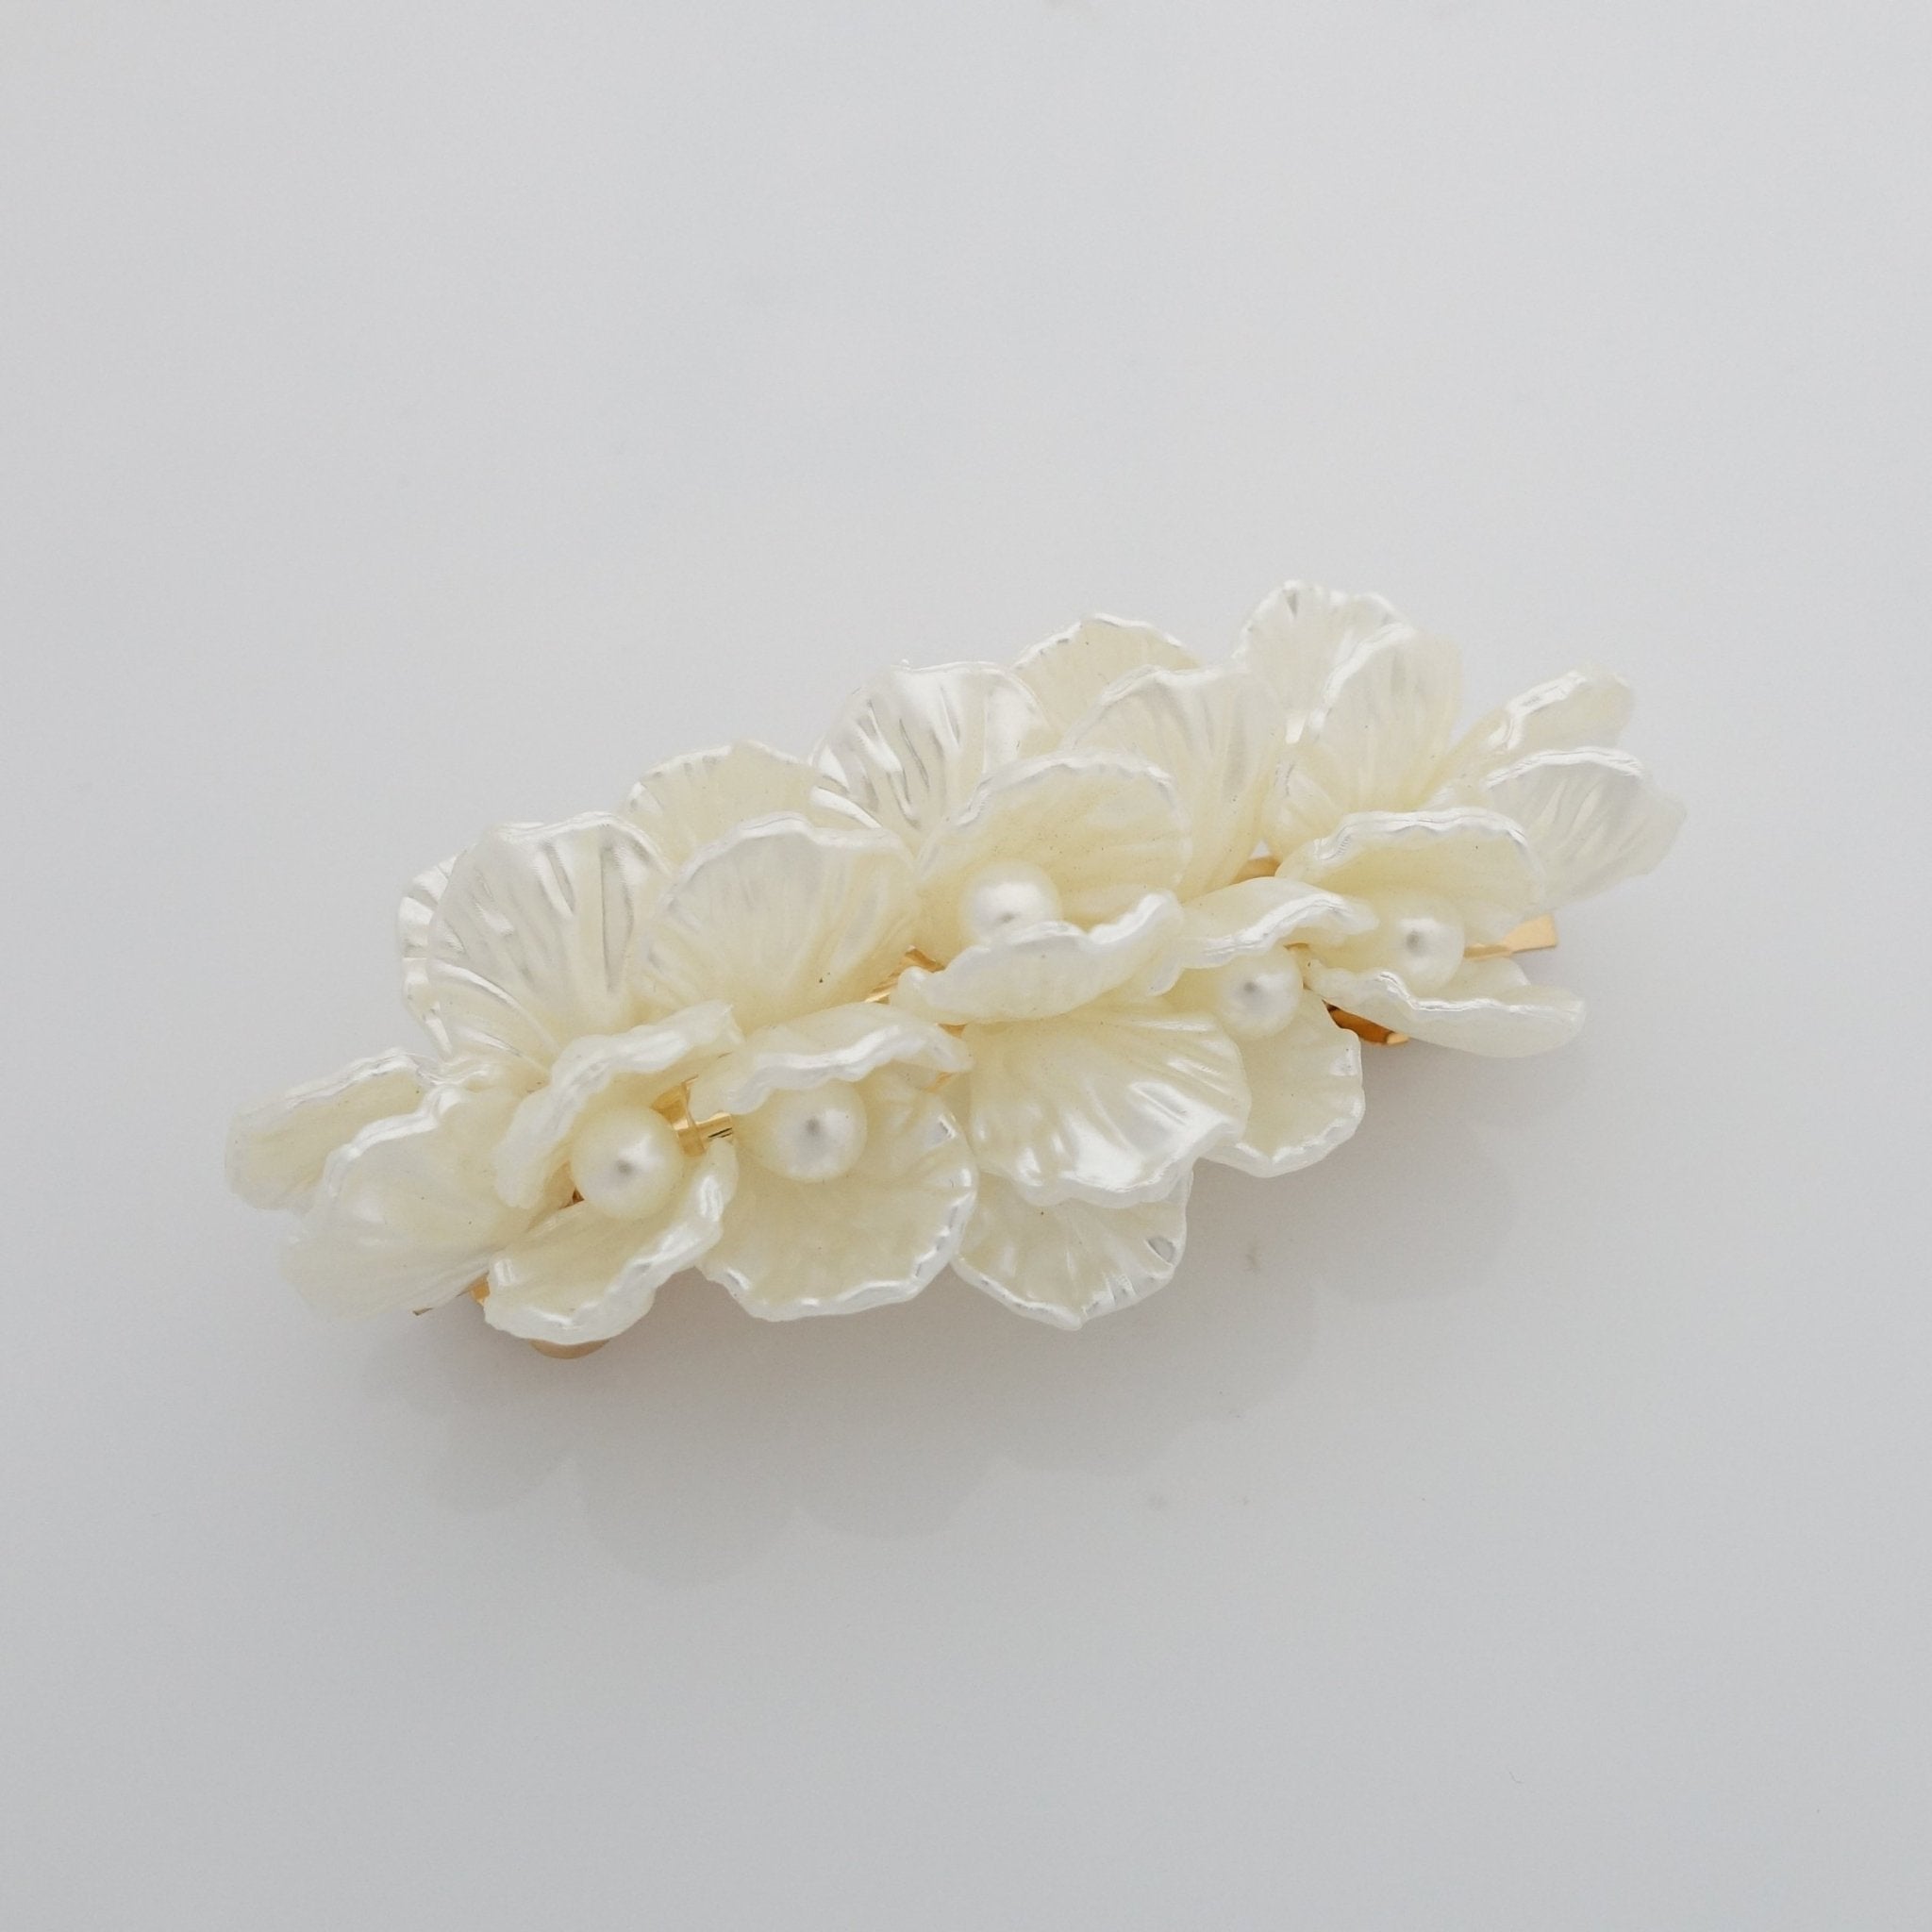 VeryShine Pearl in the shell acrylic embellished french hair barrette women hair clip accessory